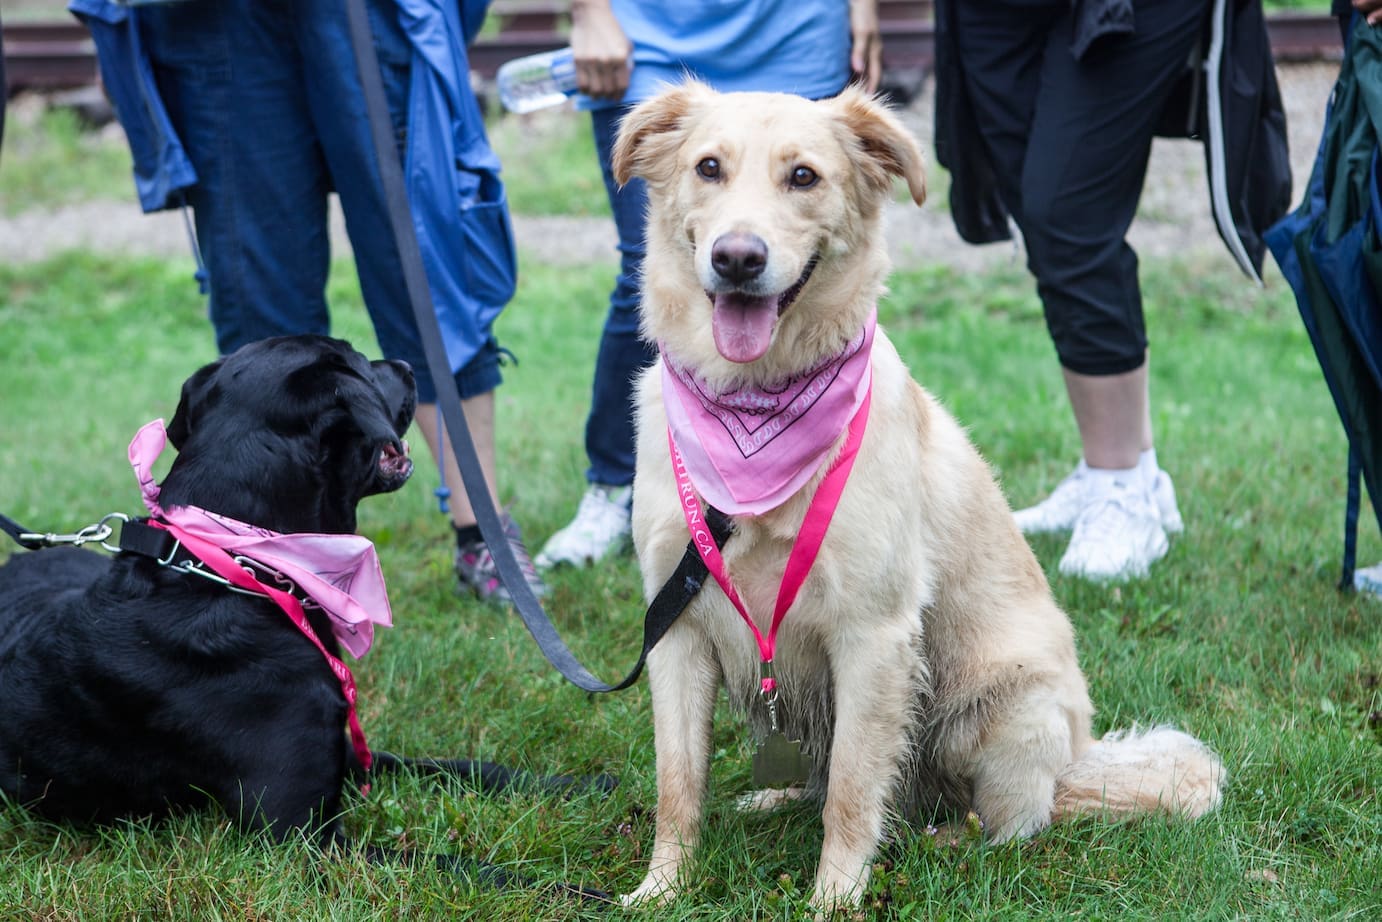 Two dogs, wearing BRIGHT Run medals